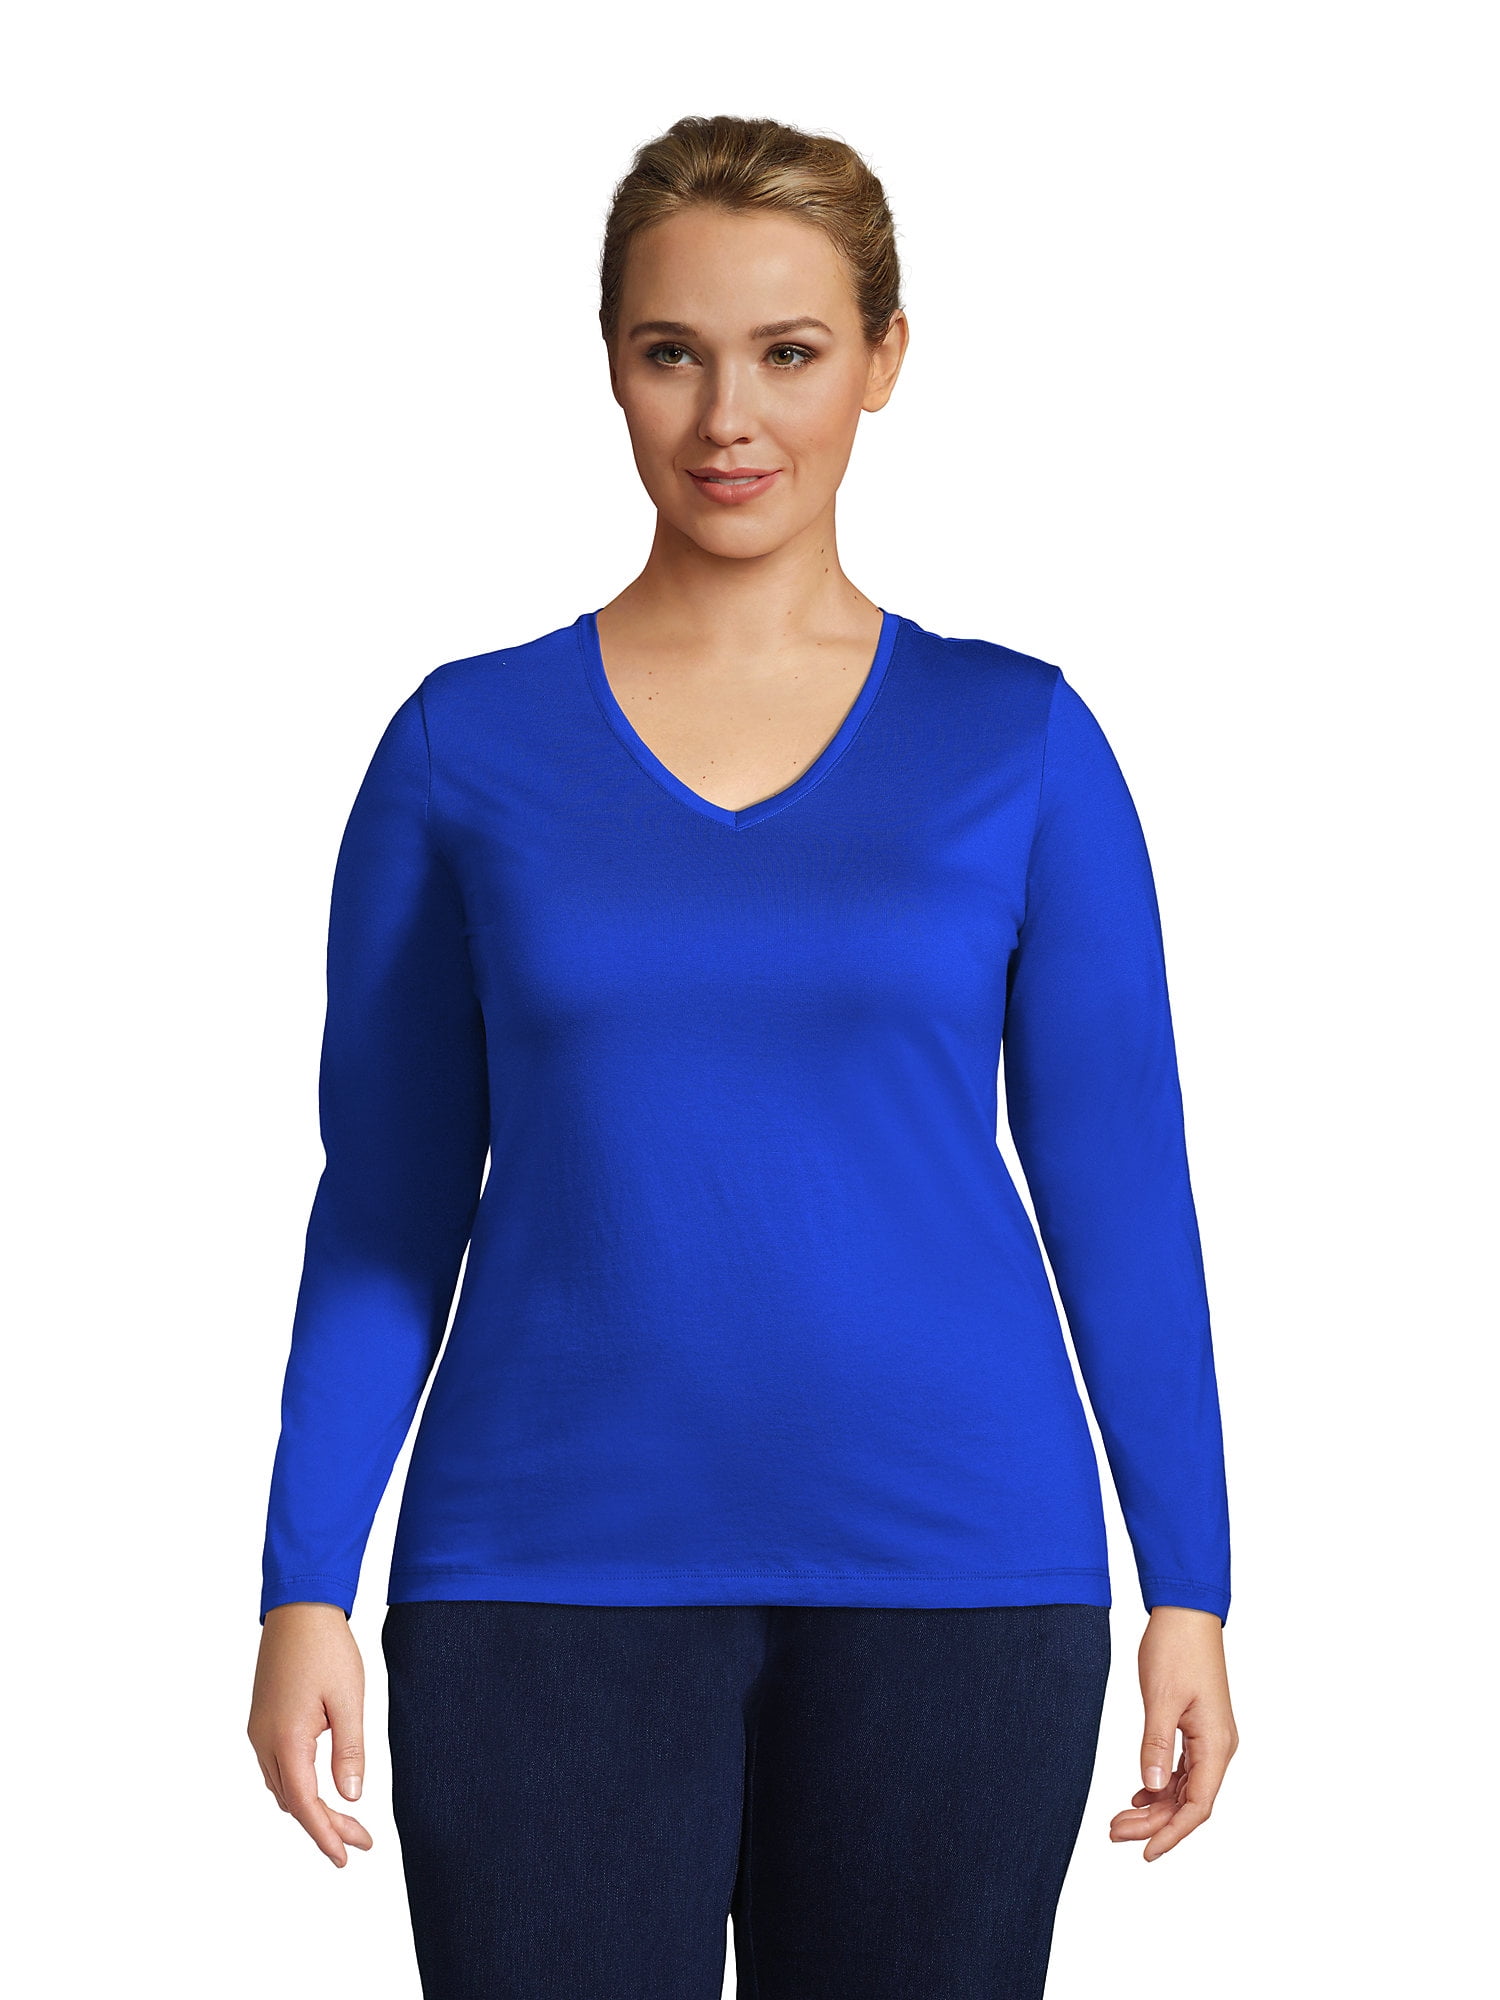 Lands End Women S Plus Size Relaxed Supima Cotton Long Sleeve V Neck T Shirt